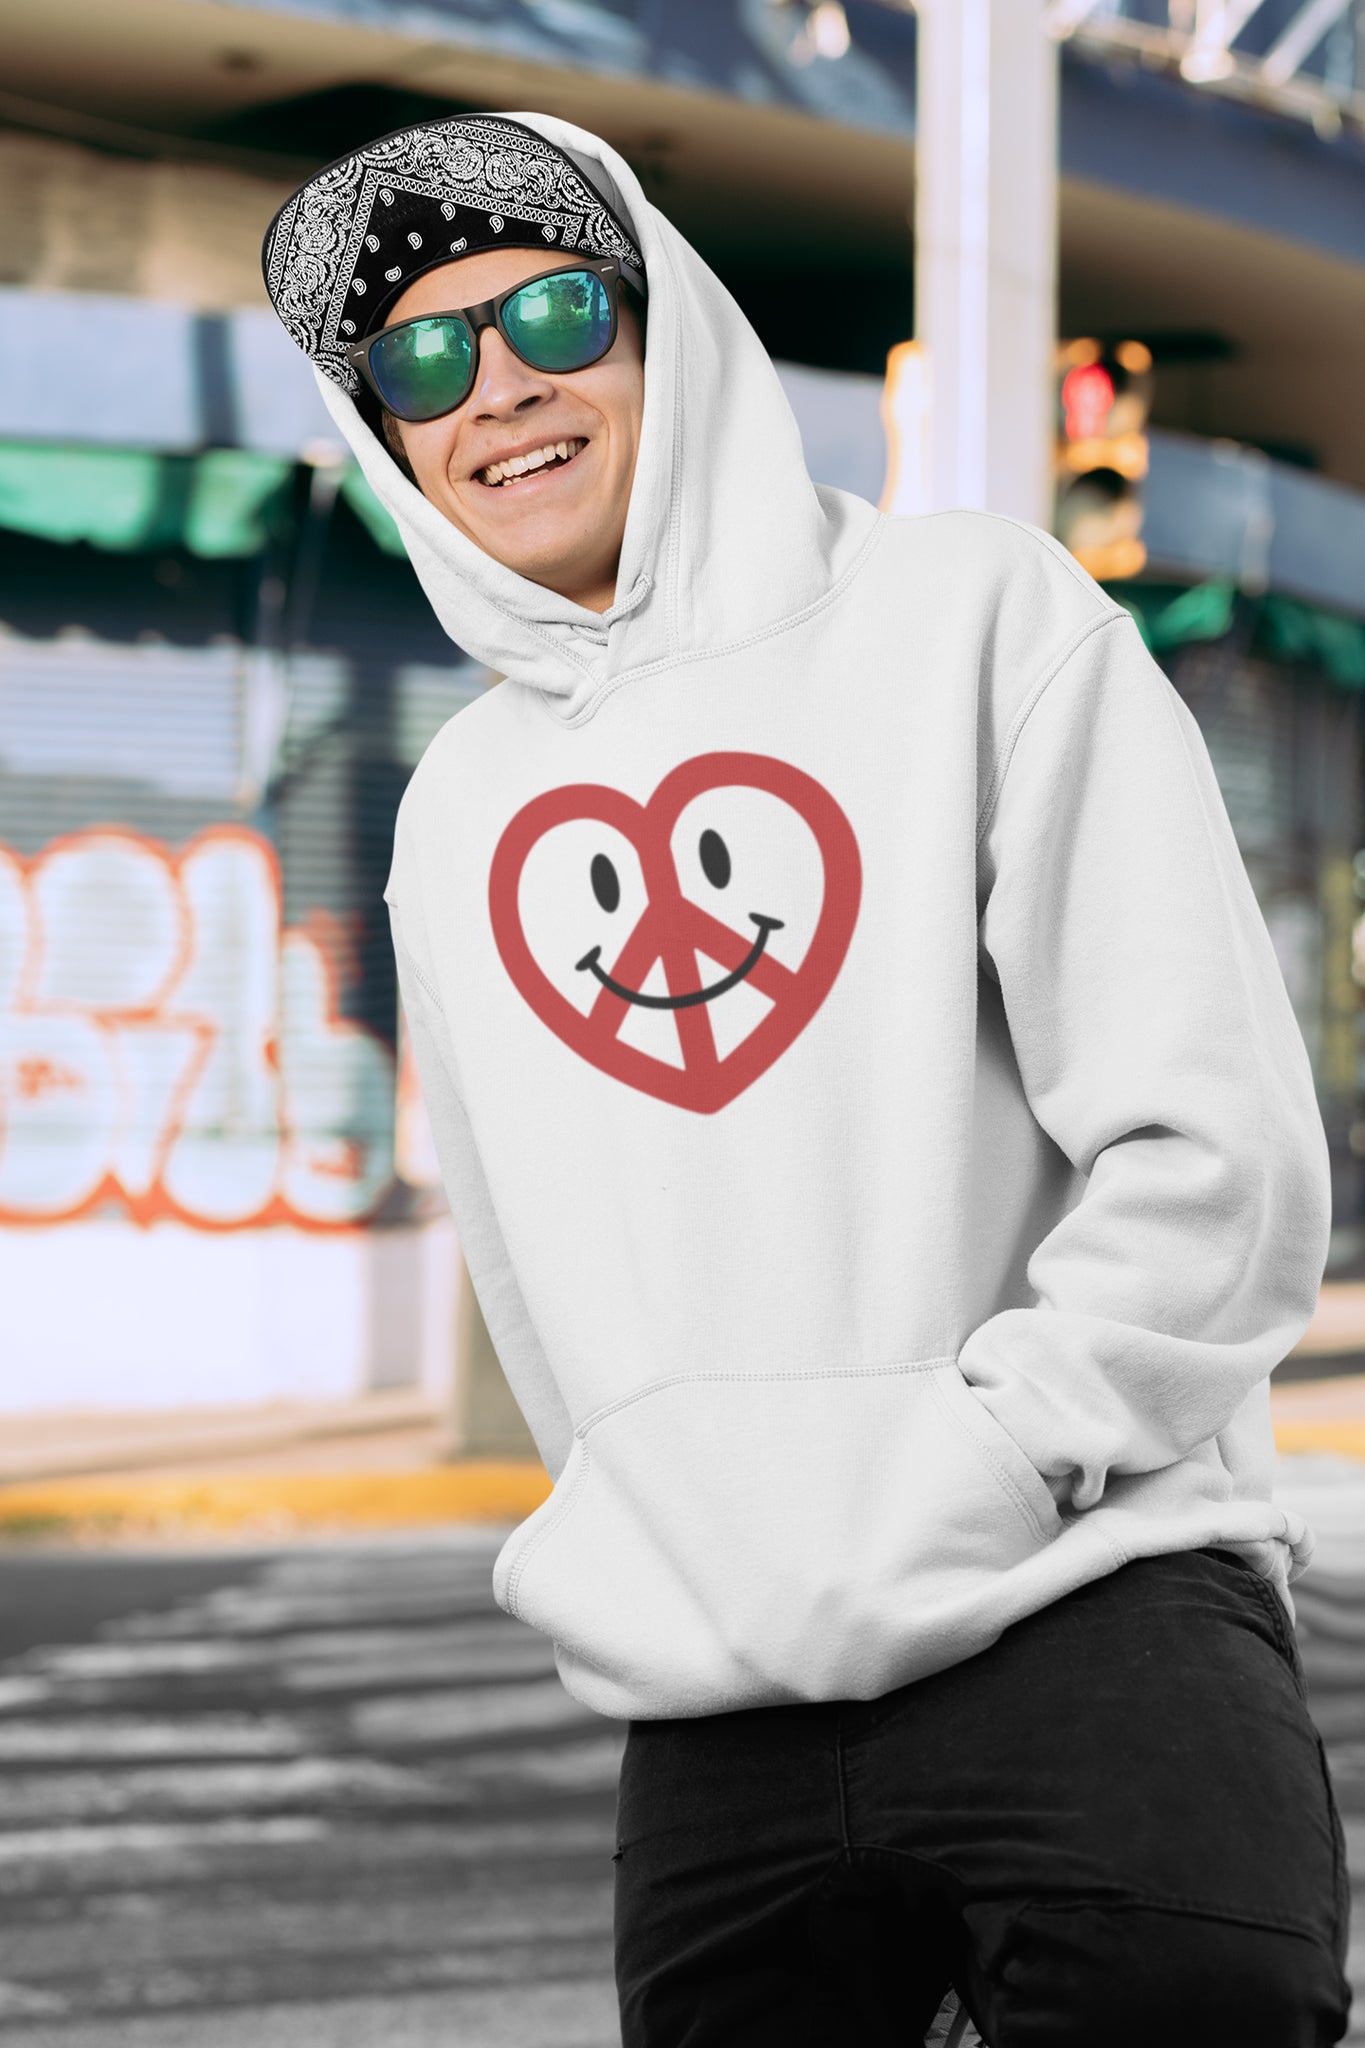 White Love Peace and Happiness Unisex Hoodies